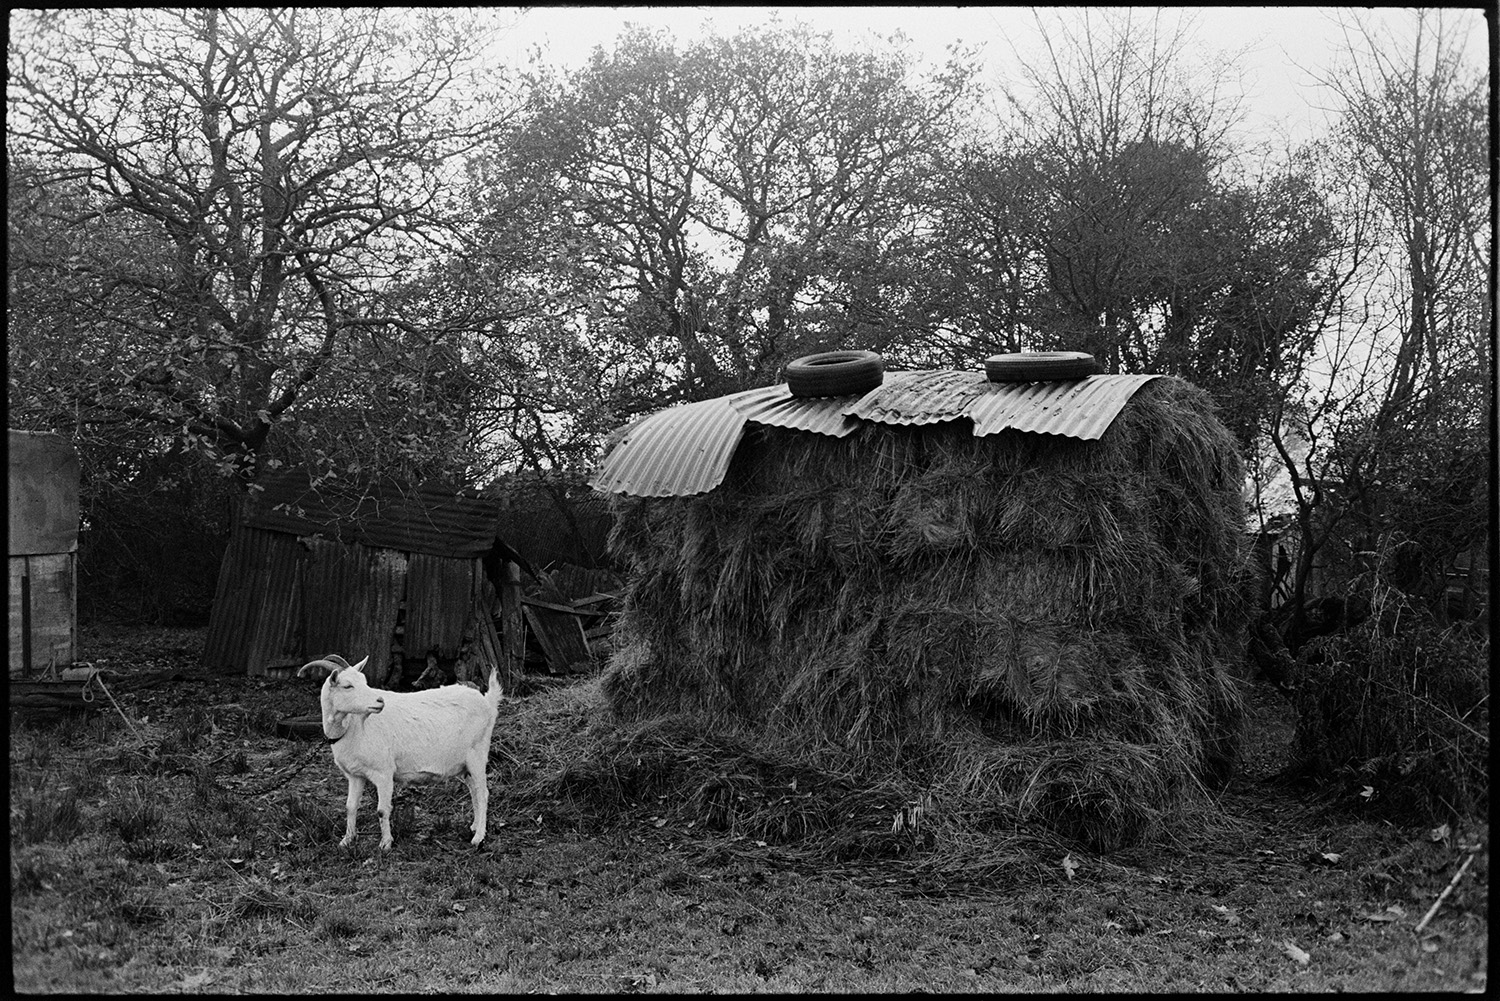 Cows, goats, geese at farm.
[A tethered goat standing beside a hay stack covered with sheets of corrugated iron and rubber tyres at Cuppers Piece, Beaford. Trees and a corrugated iron shed can be seen in the background.]